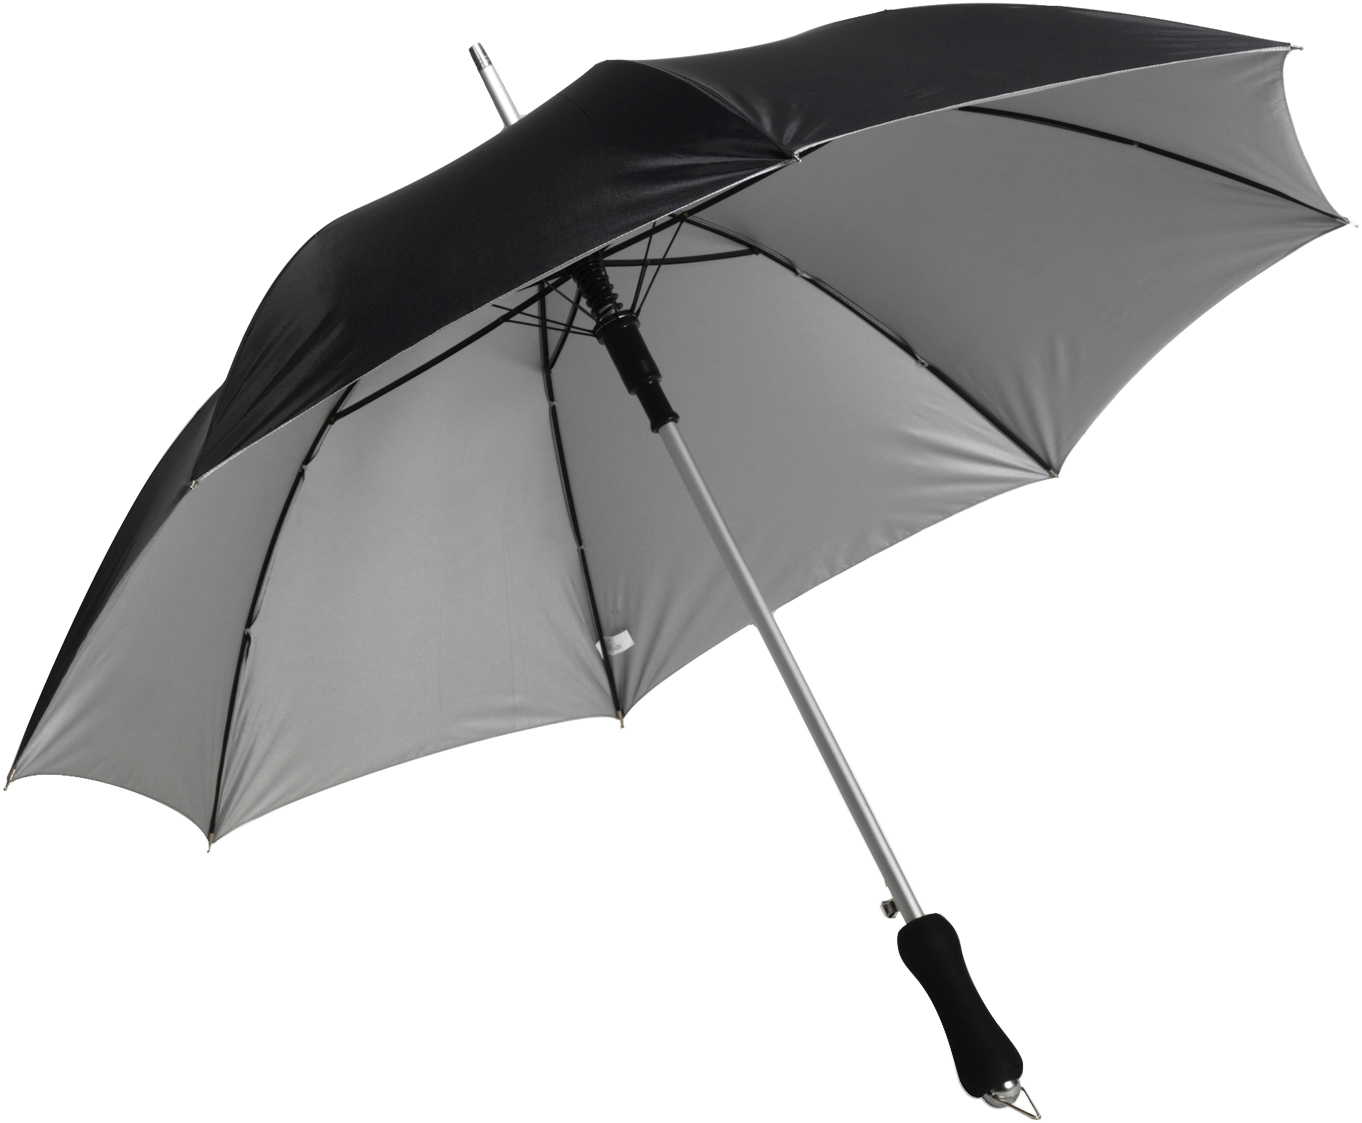 004096 050999999 3d135 ins pro01 fal - Umbrella with silver underside